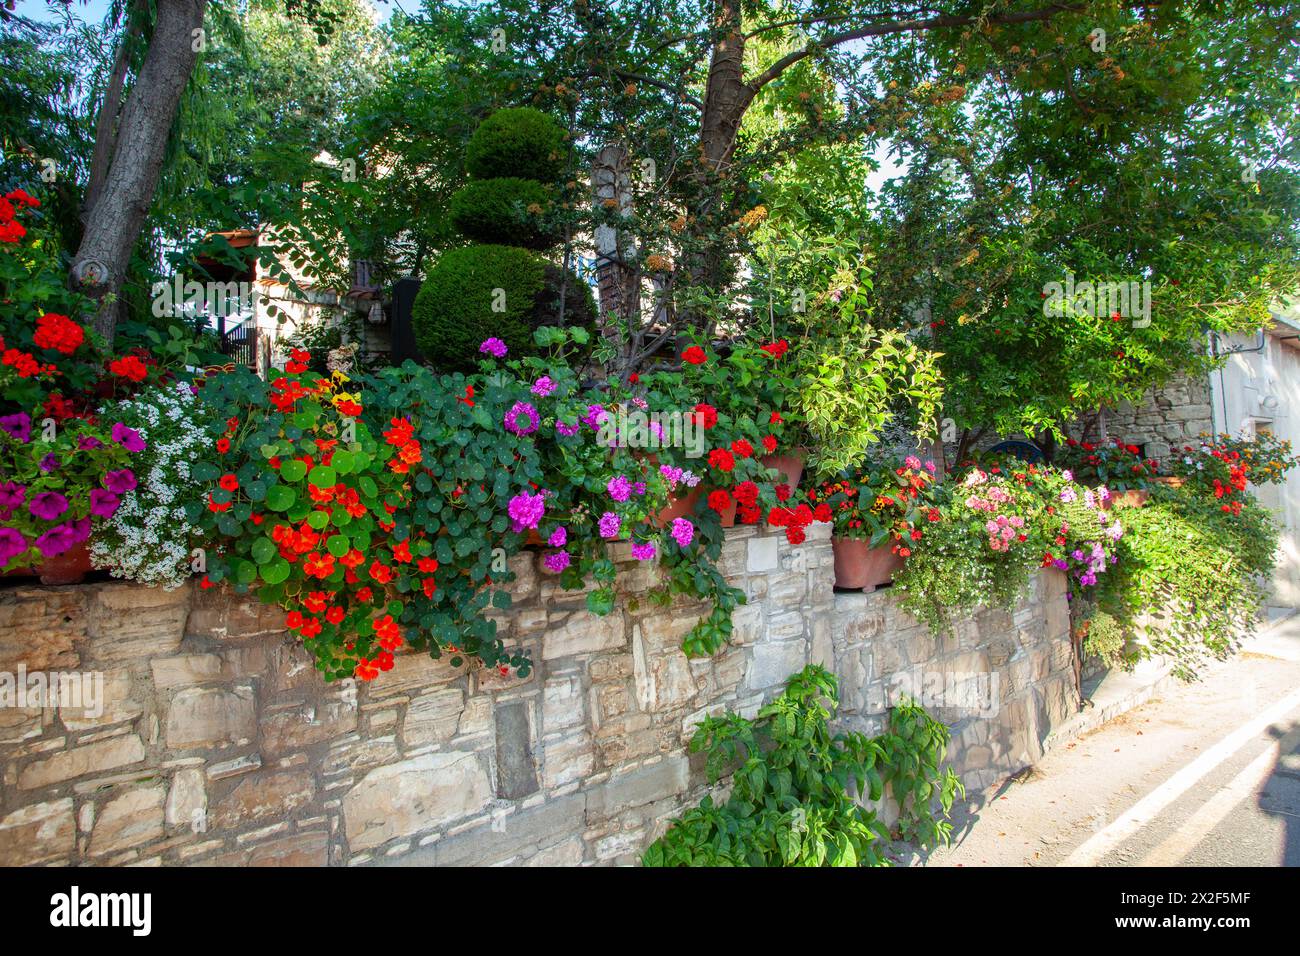 Local houses and gardens decorated with flowering Geranium plants Photographed in the Troodos Mountains, Cyprus Stock Photo